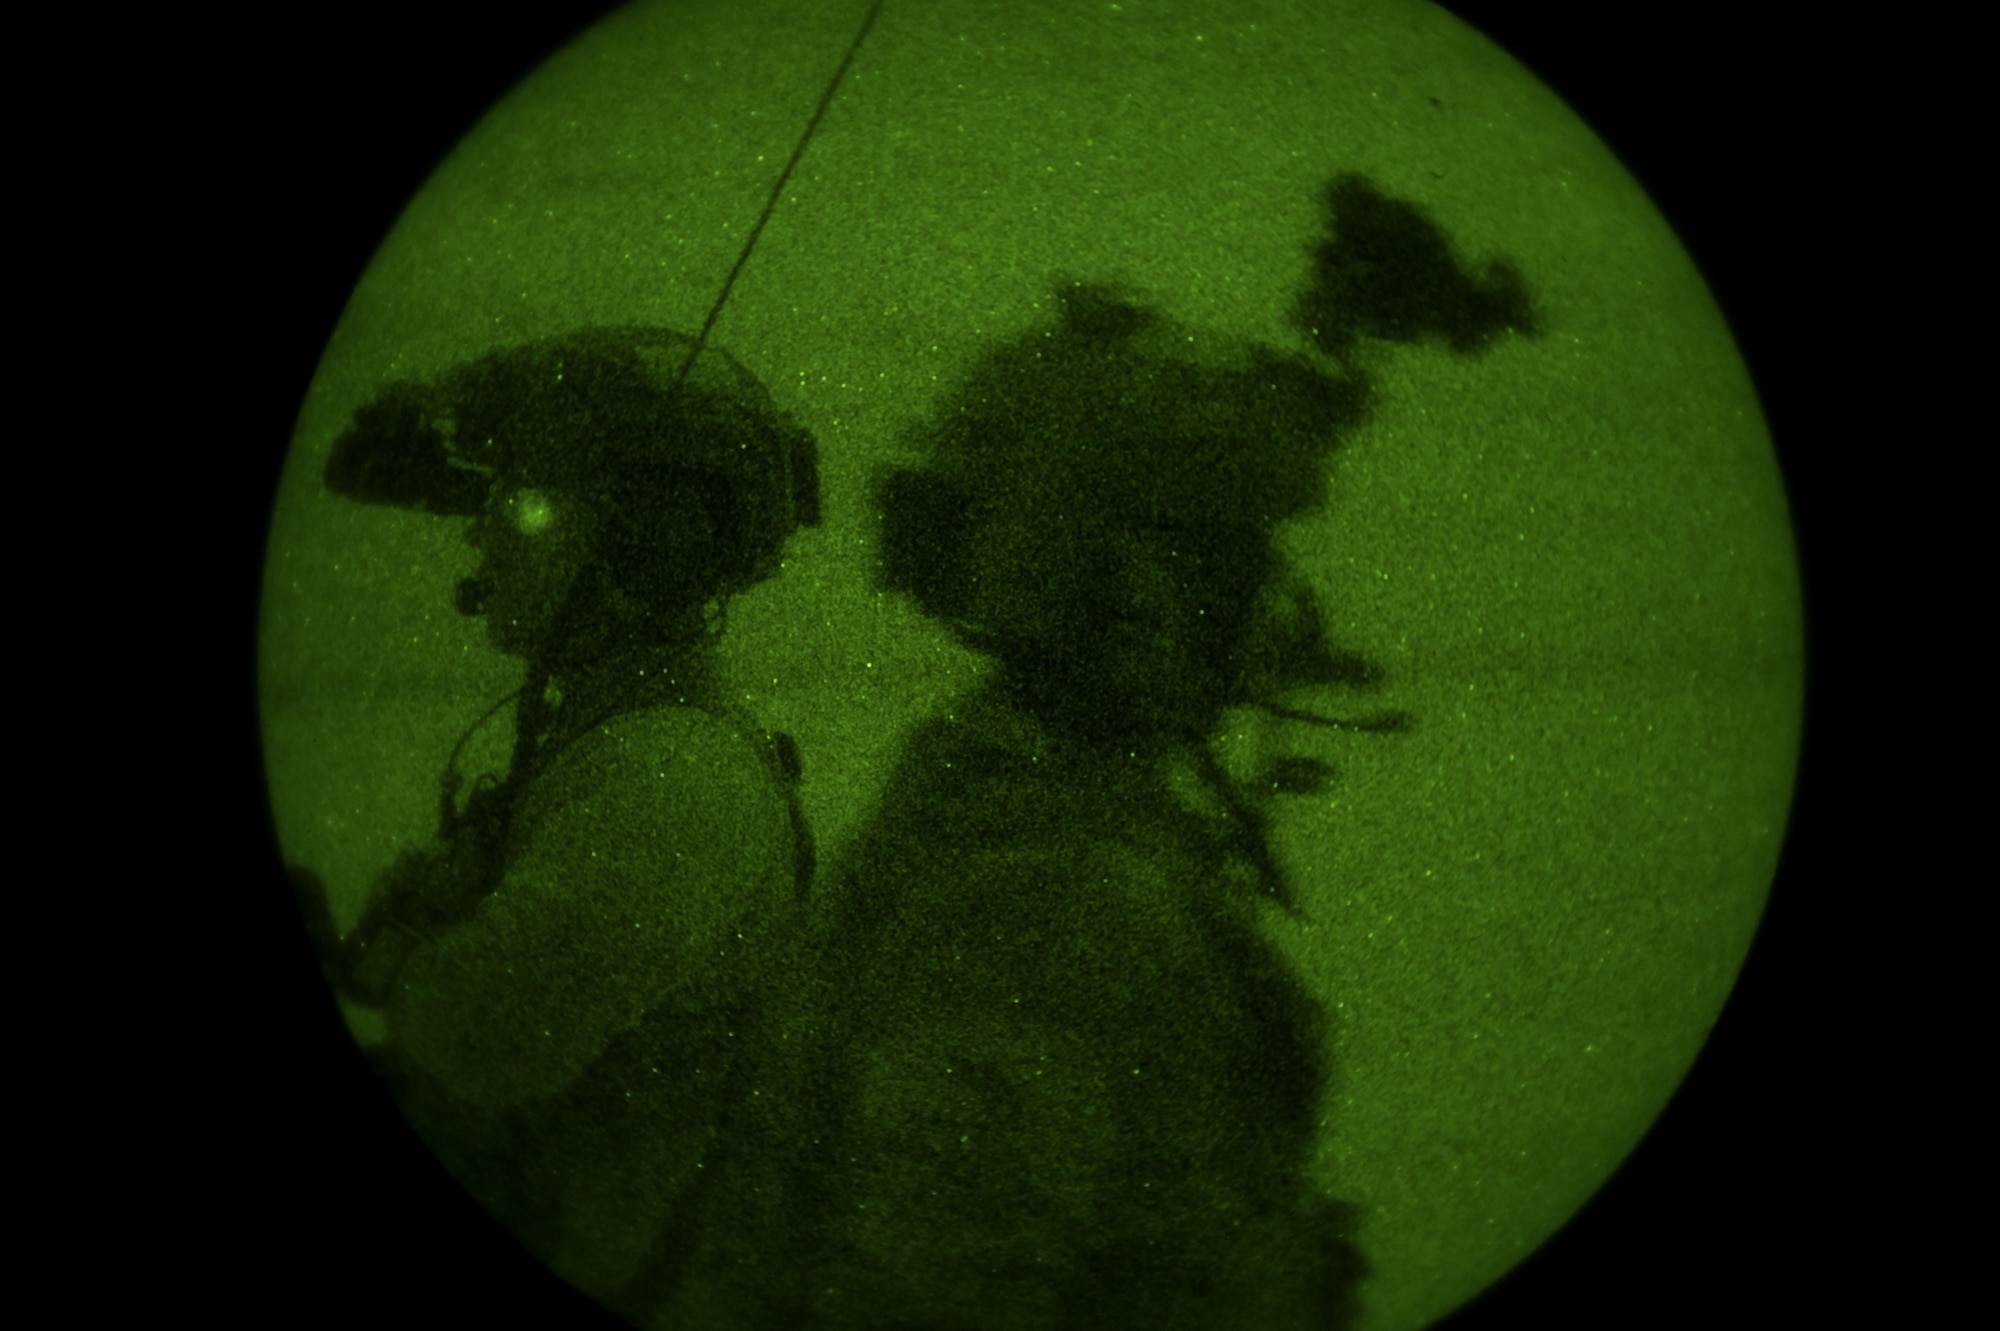 Special Tactics Airmen assigned to the 26th Special Tactics Squadron communicate with aircraft in their airspace during a Full Mission Profile exercise at White Sands Missile Range, N.M., Oct. 12, 2016.  The FMP was utilized to integrate special operations forces and foster tactical maturity through deliberate planning and execution of a force projection package and enable Special Tactics Airmen pre-deployment evaluation. (U.S. Air Force photo by Tech. Sgt. Manuel J. Martinez)